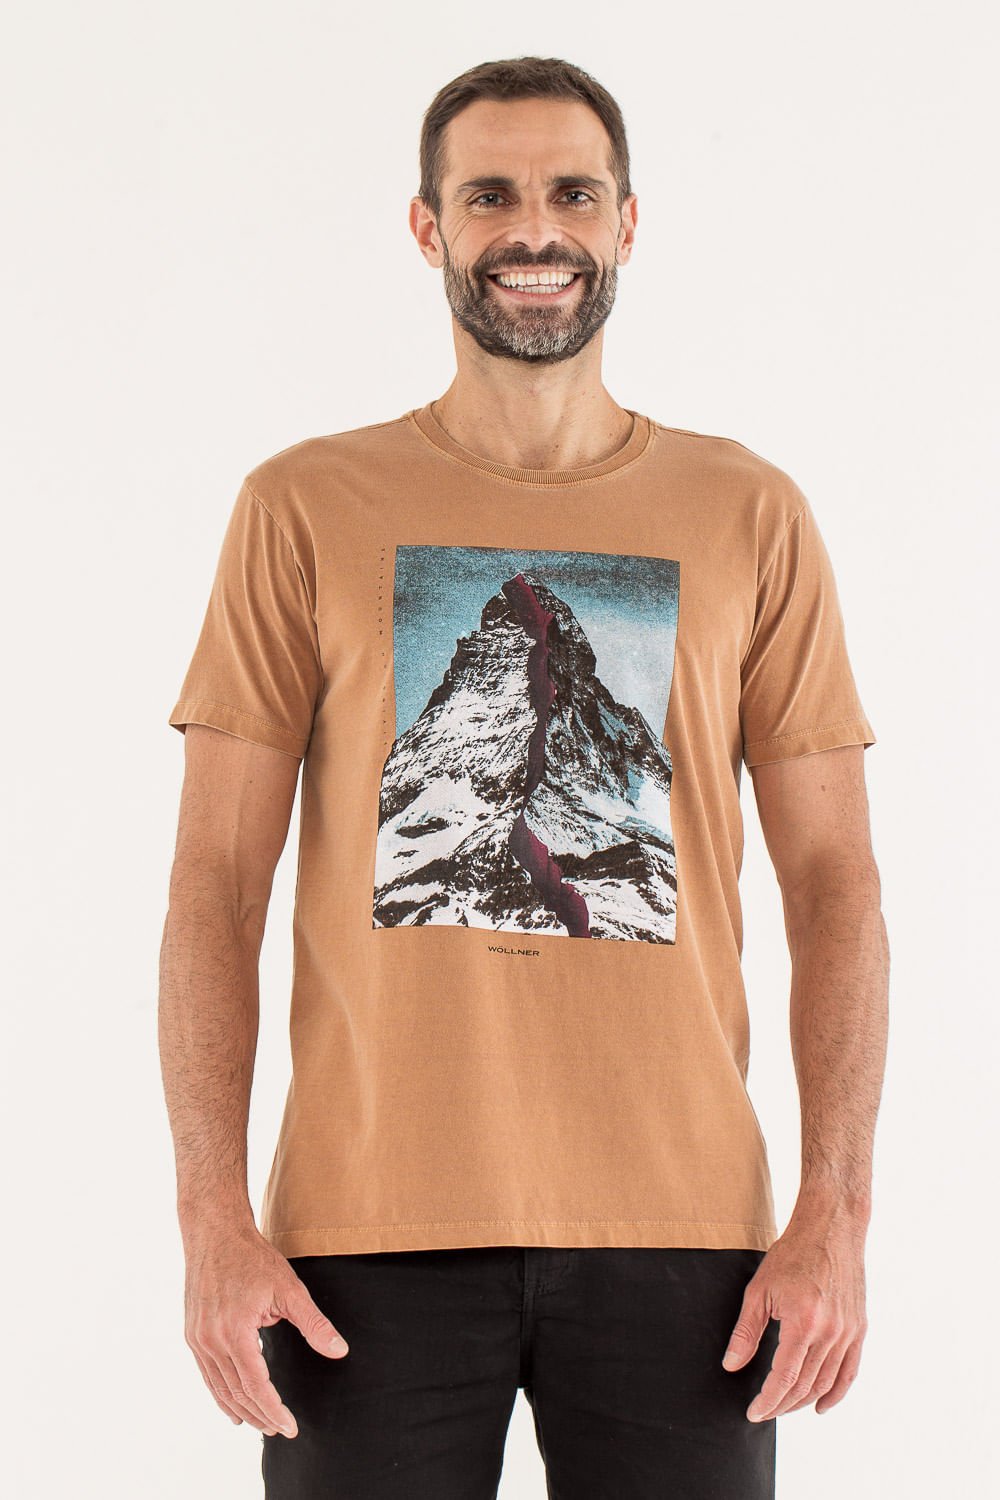 T-SHIRT MOUNTAINS CAMELO